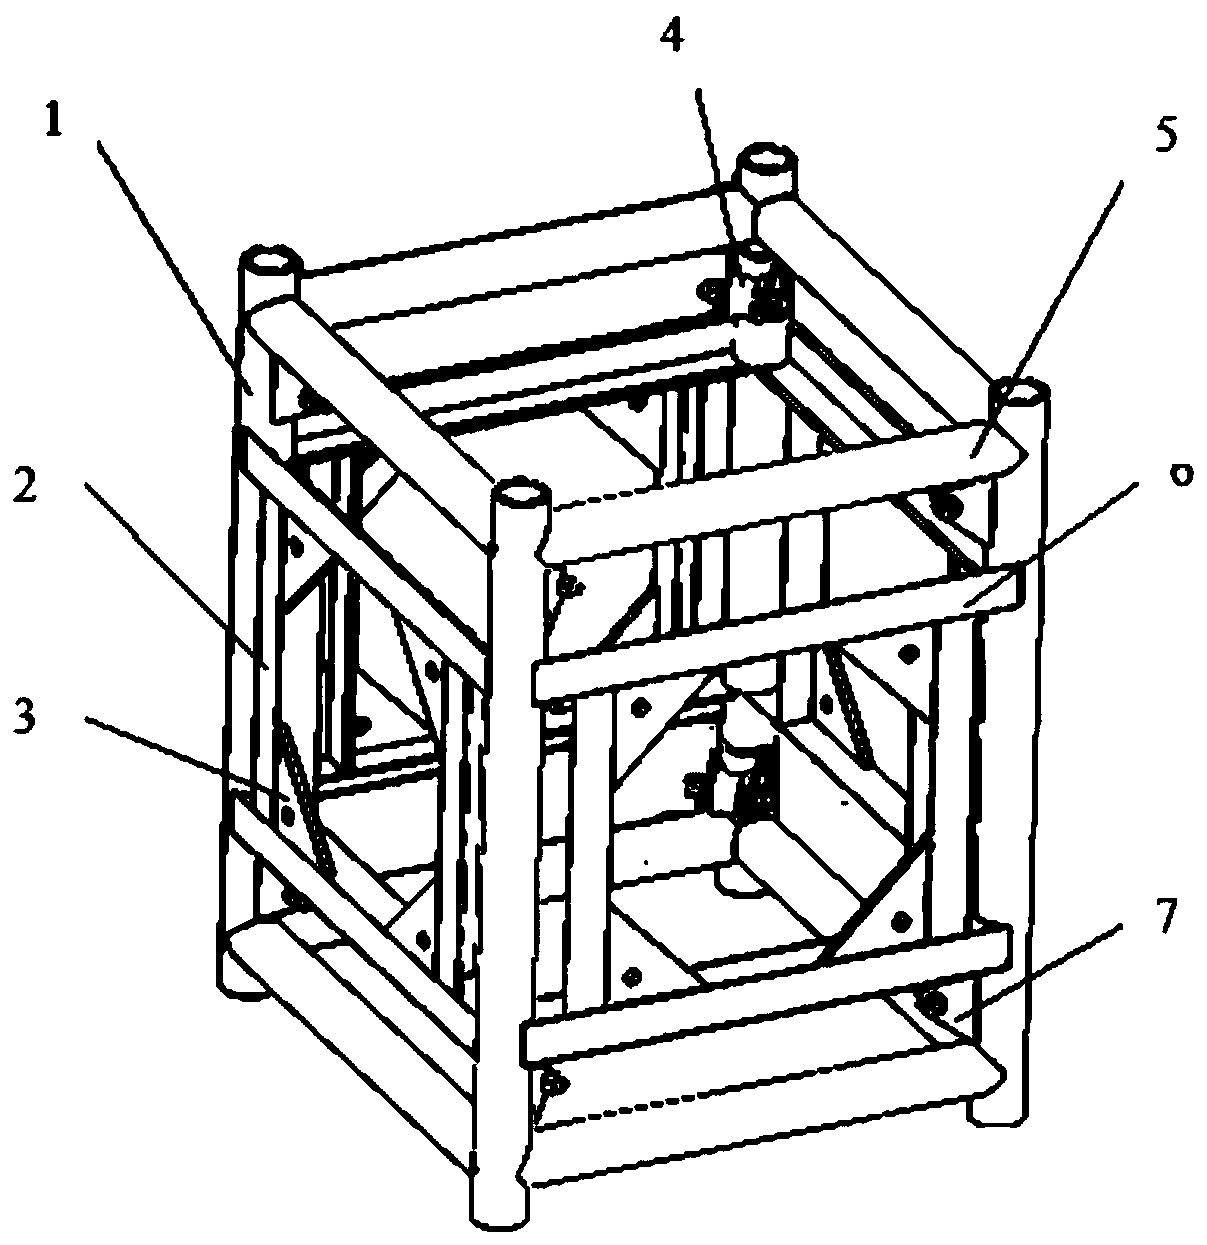 Square sleeve structure module of stage frame